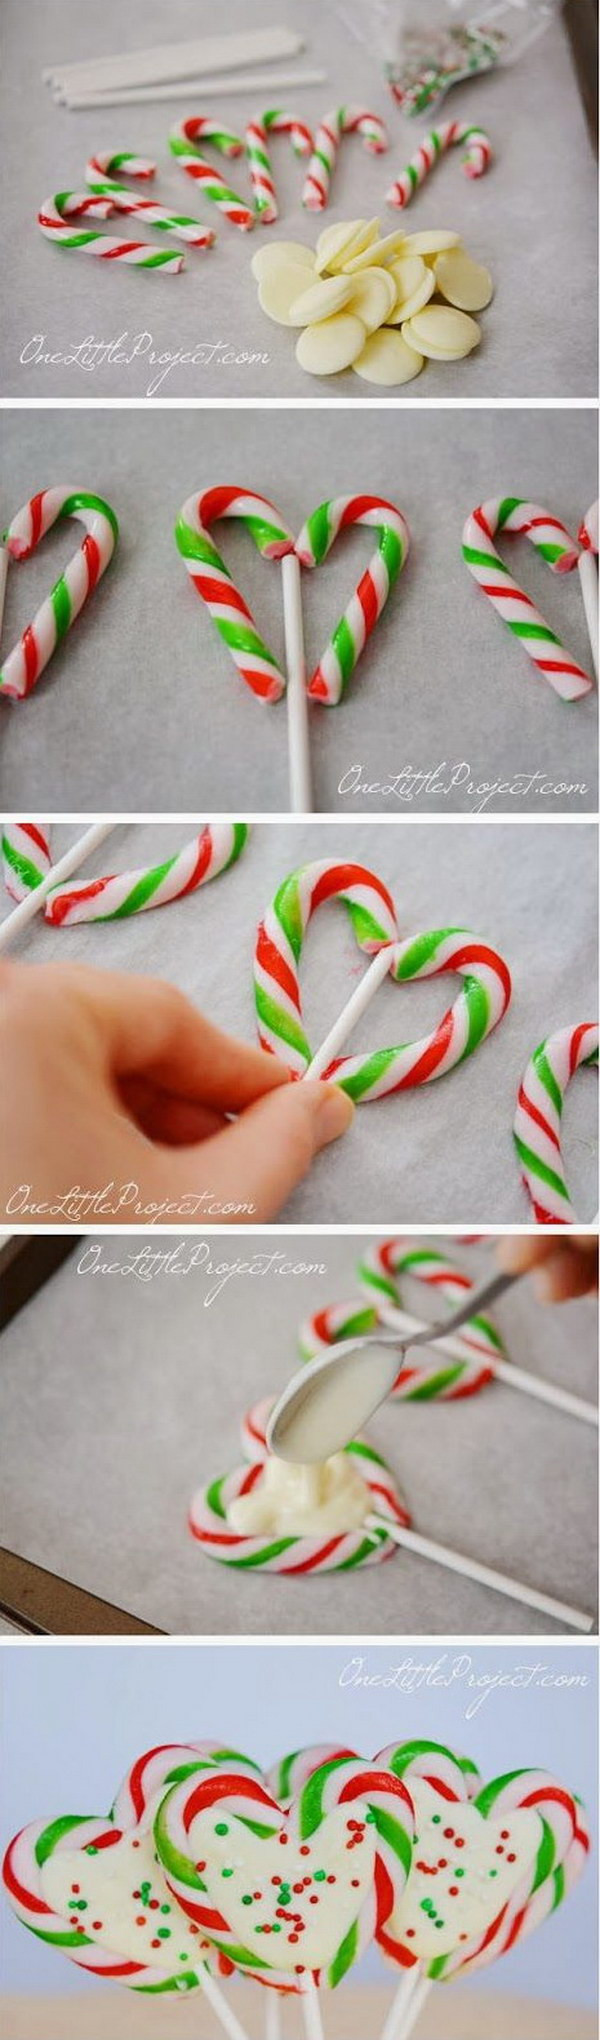 Candy DIY Gifts
 20 Awesome DIY Christmas Gift Ideas & Tutorials